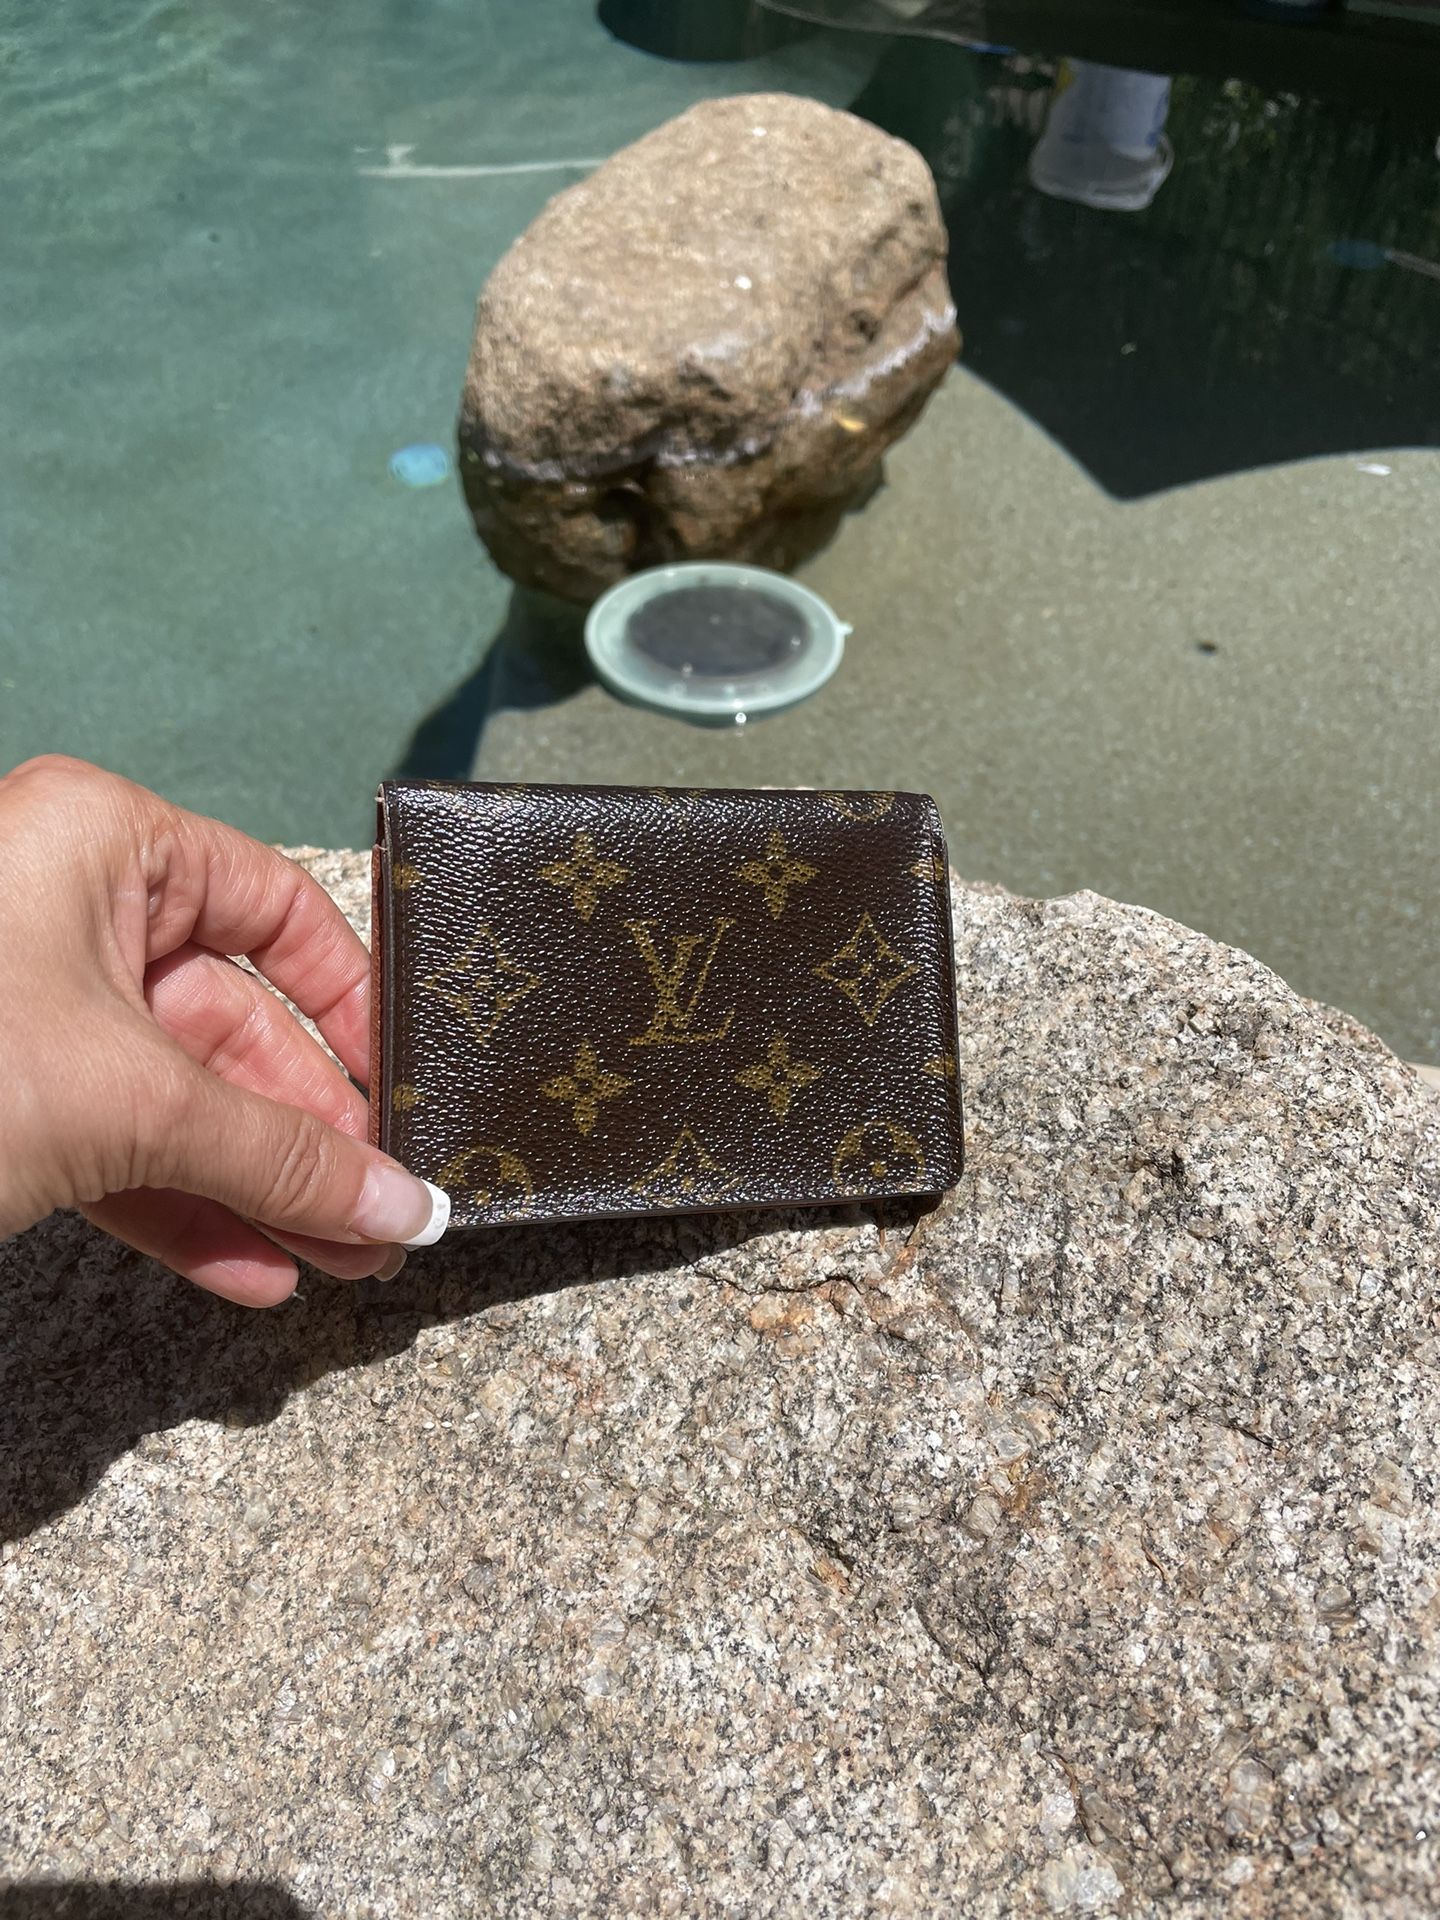 INDO Enterprises - LOUIS VUITTON Wallets😍 .Price 💱 Rs 1299/- Premium  Quality with original boxes. Cash on Delivery Available😍 Order through  Whatsapp Contact - 9176225992, 9079950984